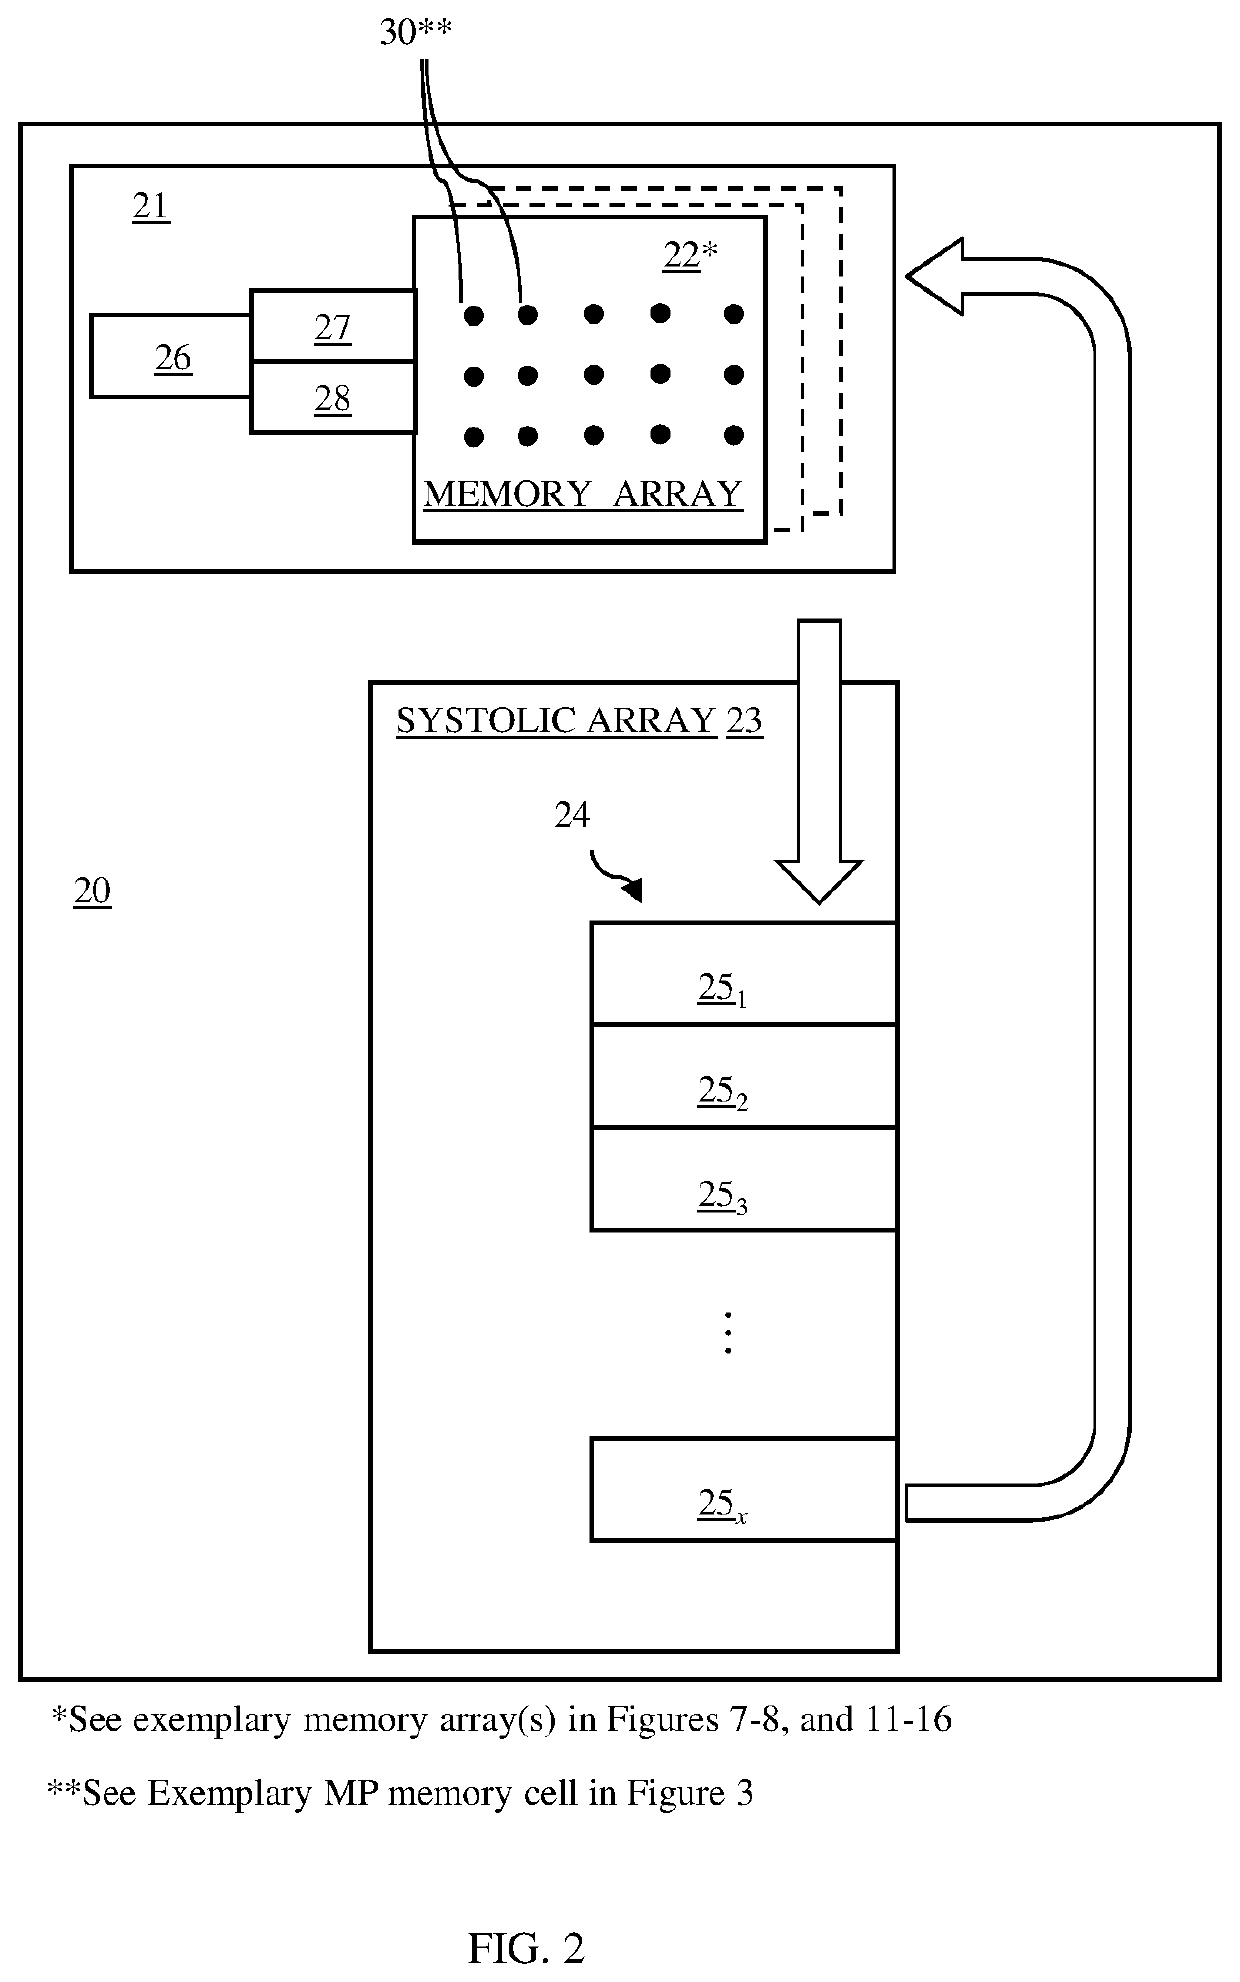 Multi-port memory architecture for a systolic array